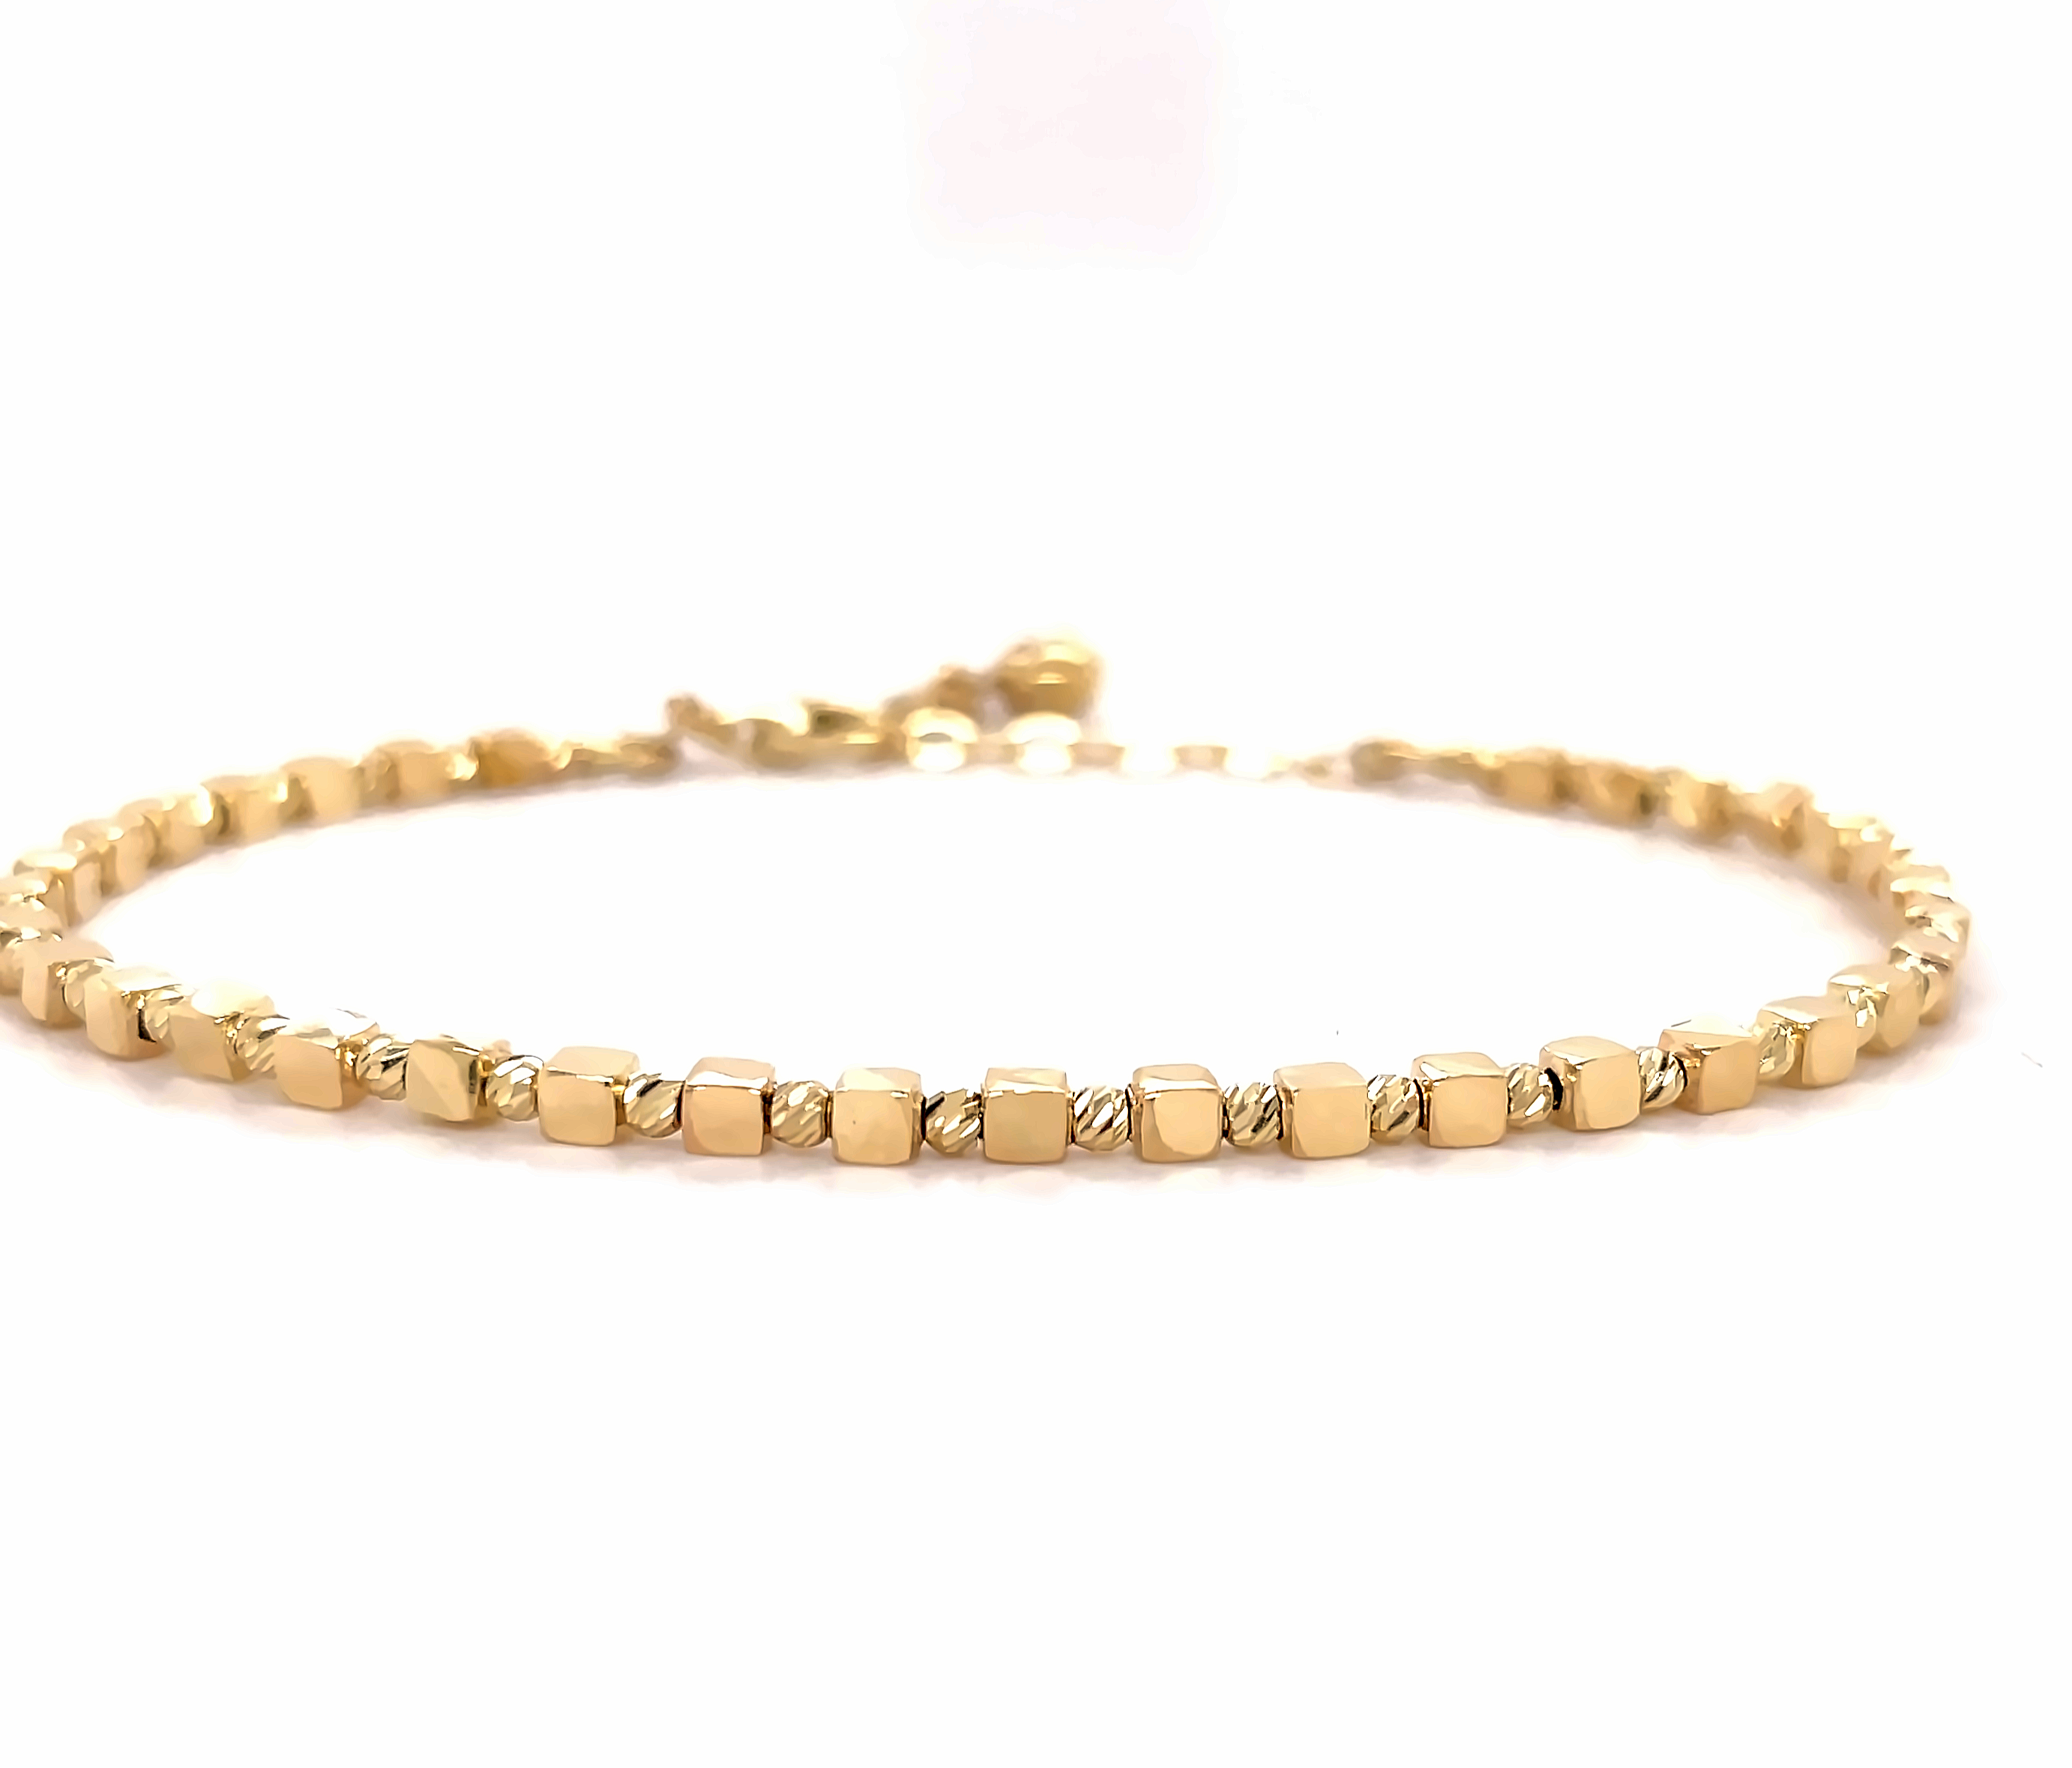 This 14k yellow gold bracelet is designed to be both stylish and secure. The 8 inch stackable bracelet features square beads and laser cut round beads for a truly unique look. The lobster clasp ensures it will stay securely in place.